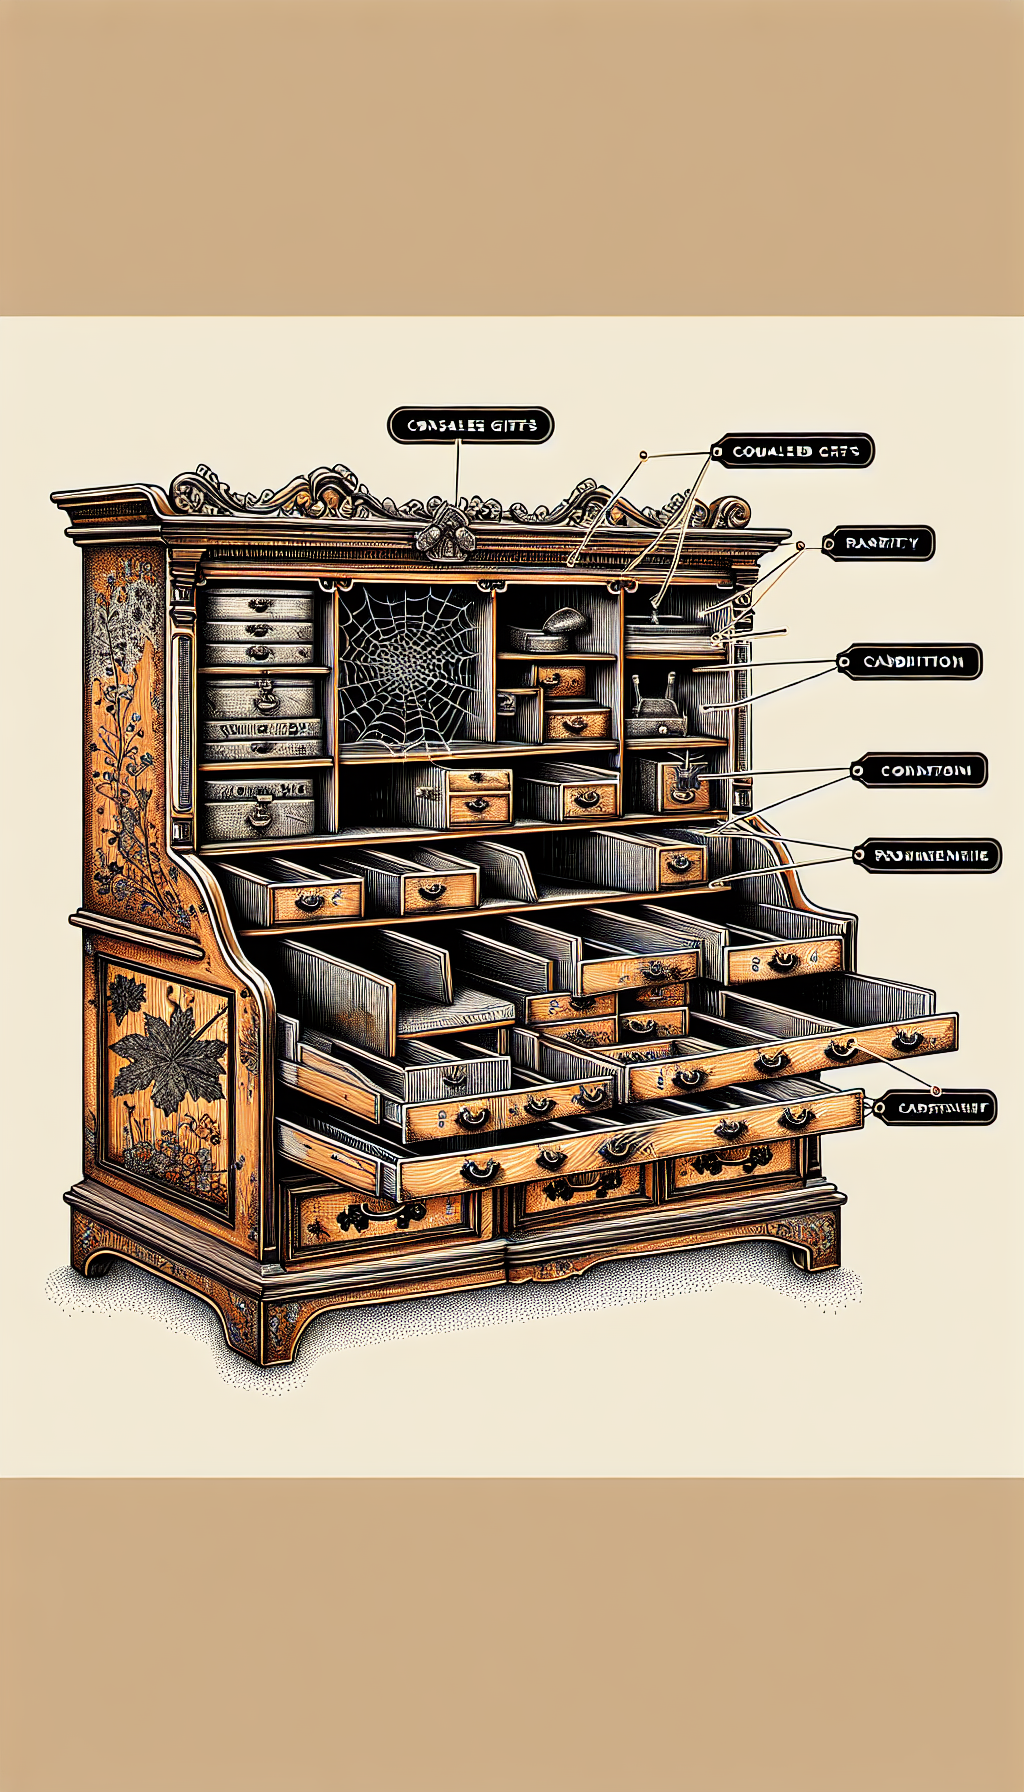 An illustration depicts an open antique secretary desk with lavish woodwork, where each compartment reveals a different factor affecting its value: rarity, condition, provenance, and craftsmanship are visually represented as hidden treasures. Intricately drawn lines form delicate spider webs and patina effects, symbolizing age, with price tags attached to each factor, floating like leaves, showcasing the desk's valuation layers.